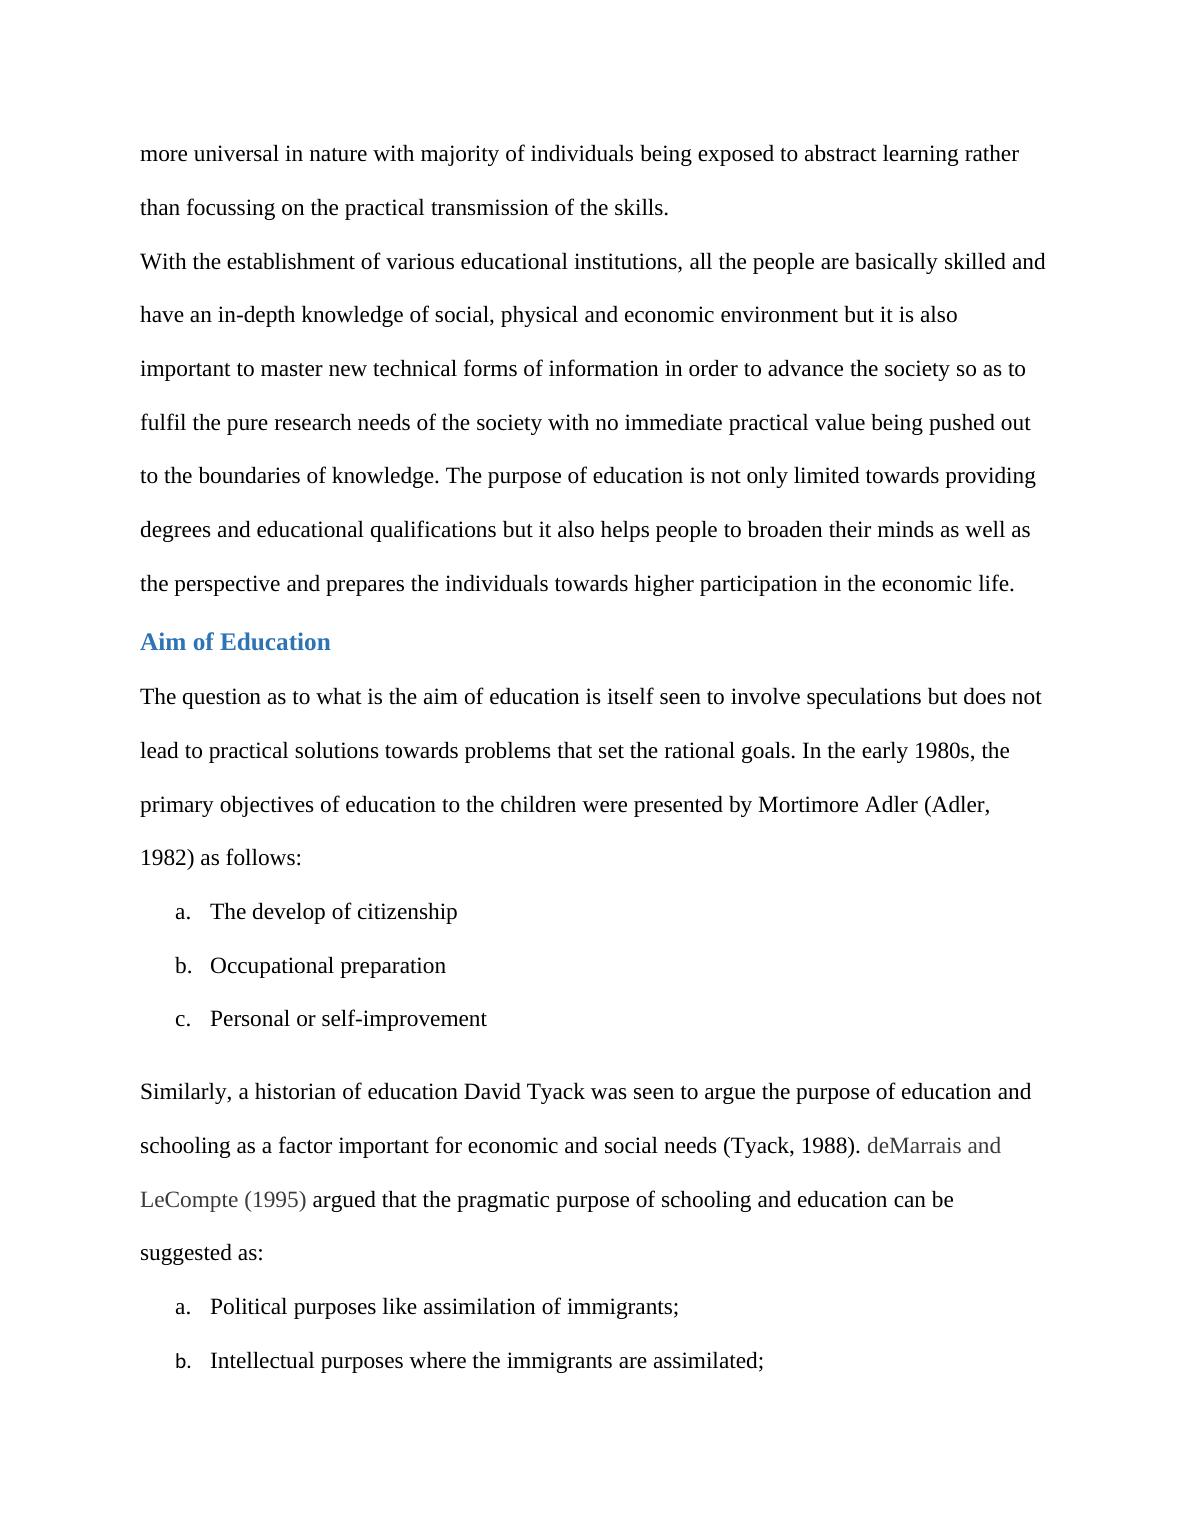 The Purpose and Future of Education: A Societal Perspective_6